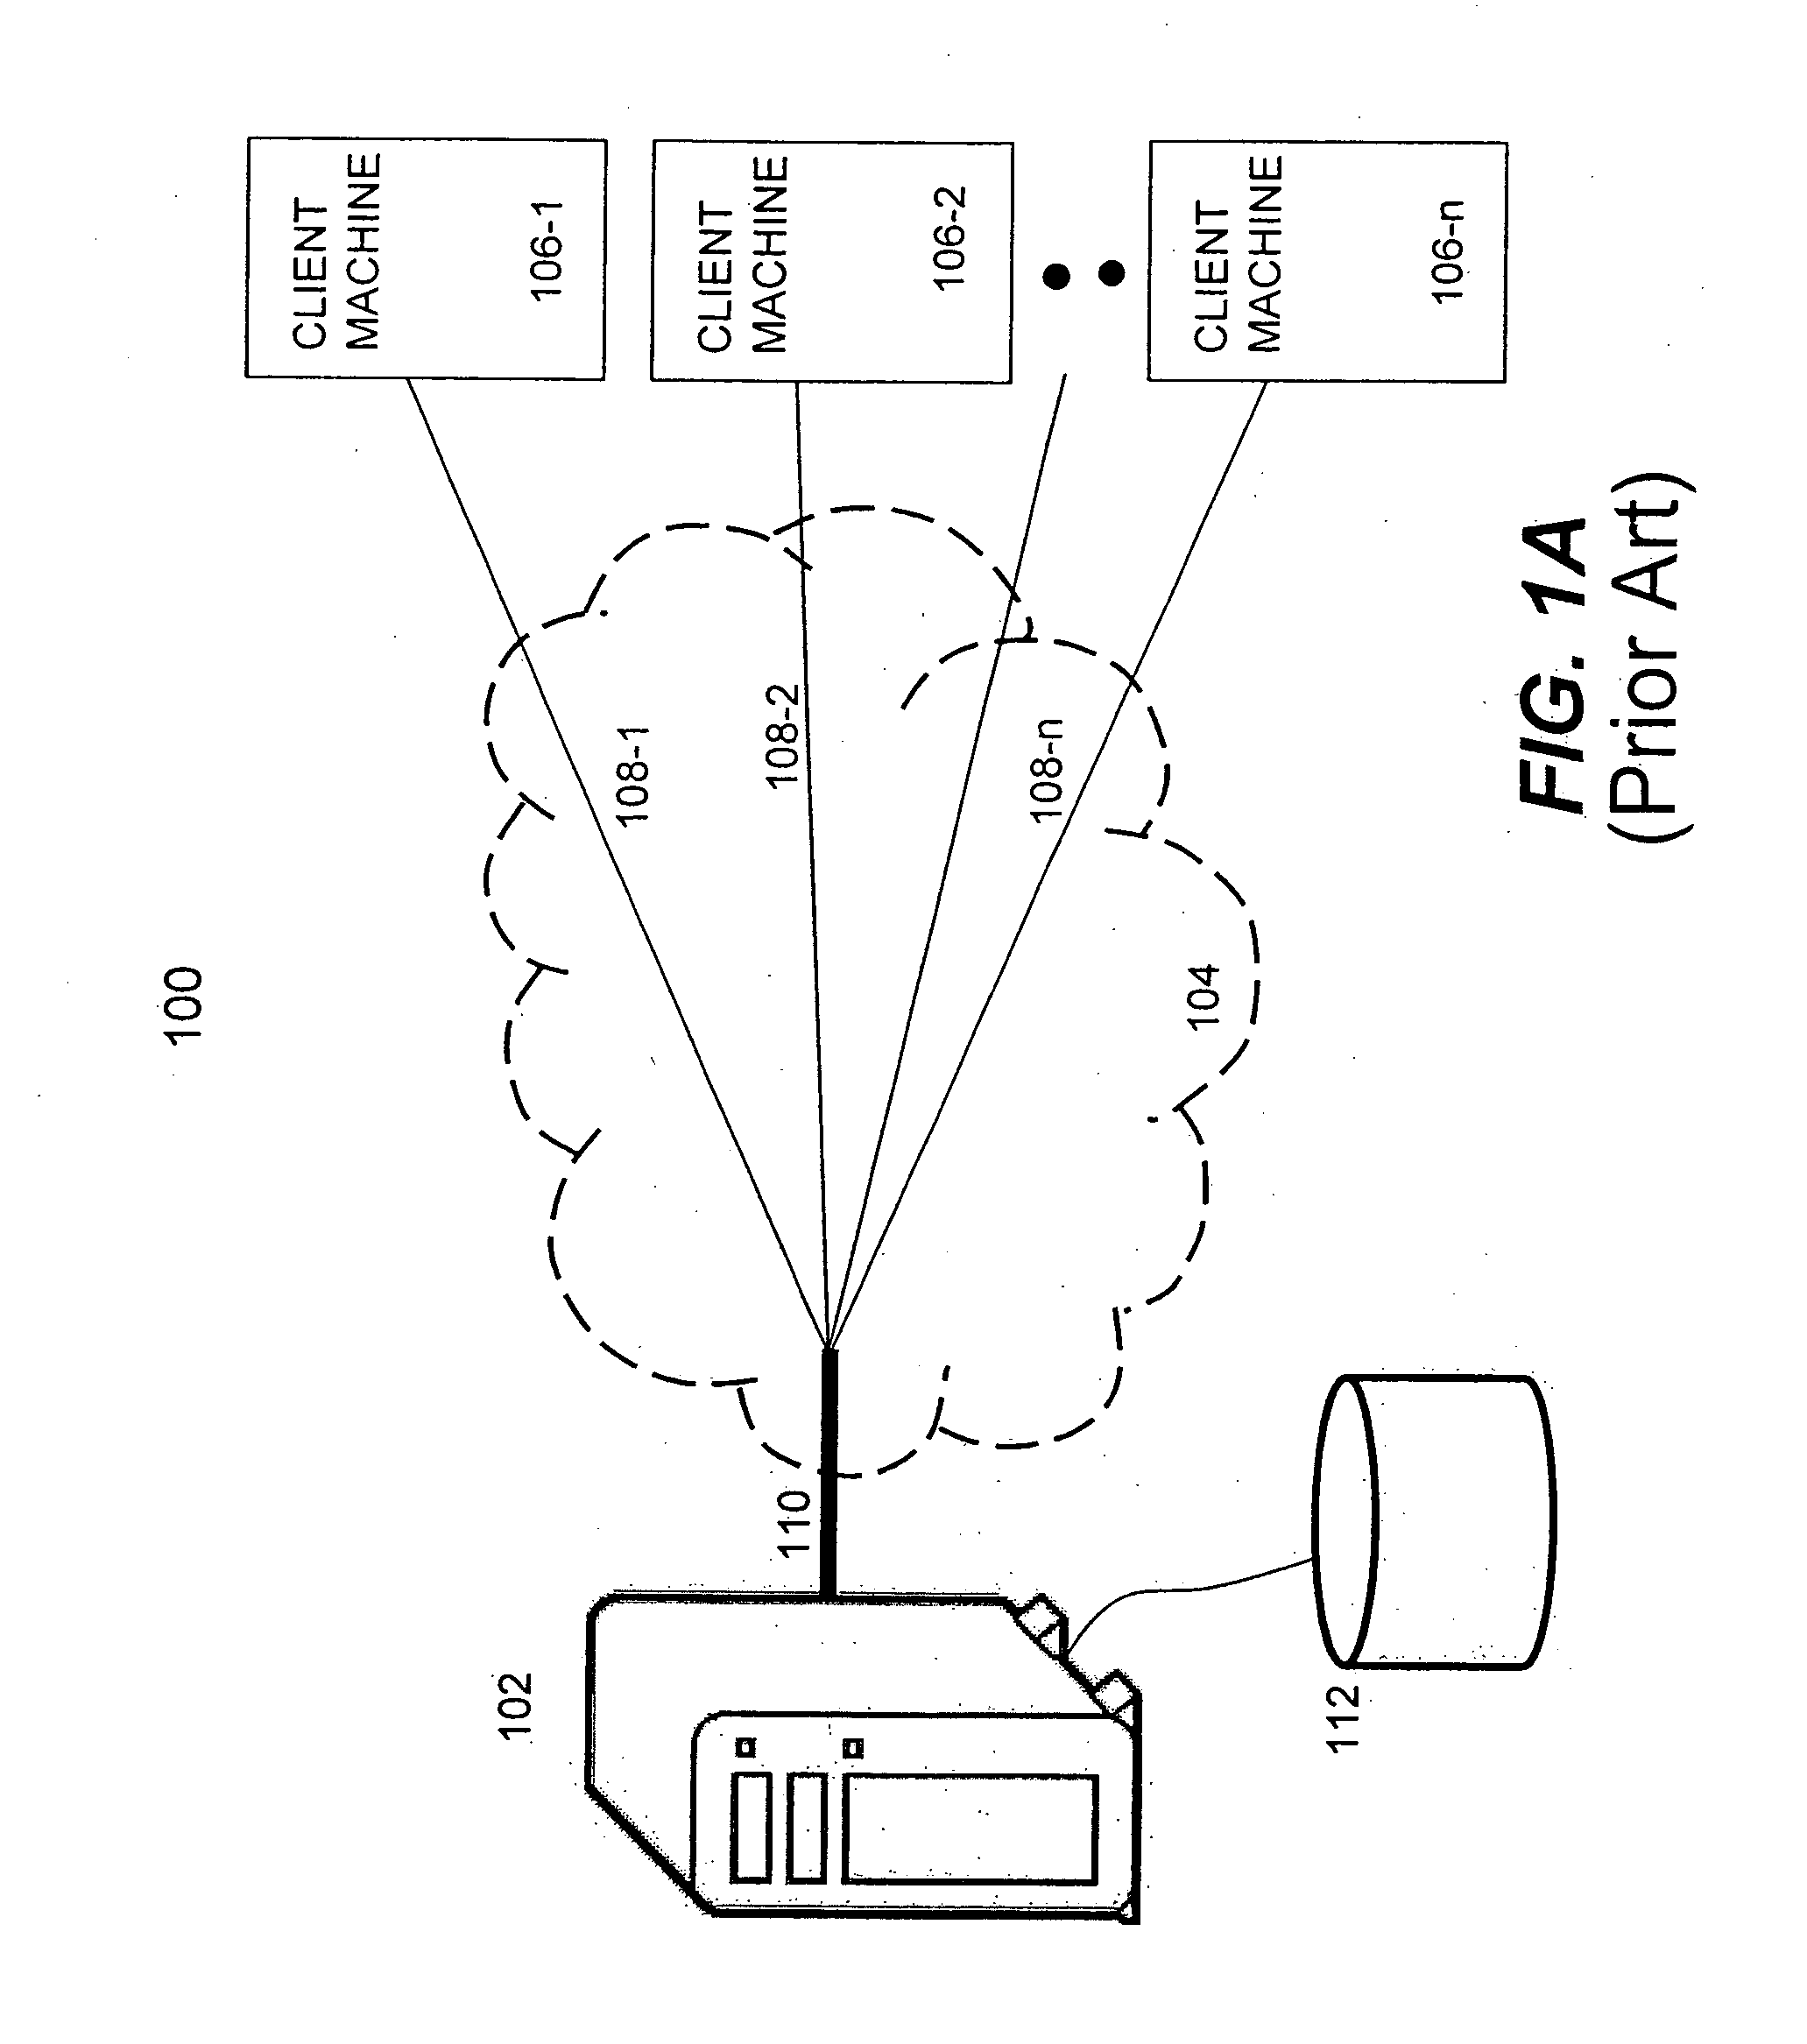 System and method for trick play of highly compressed video data